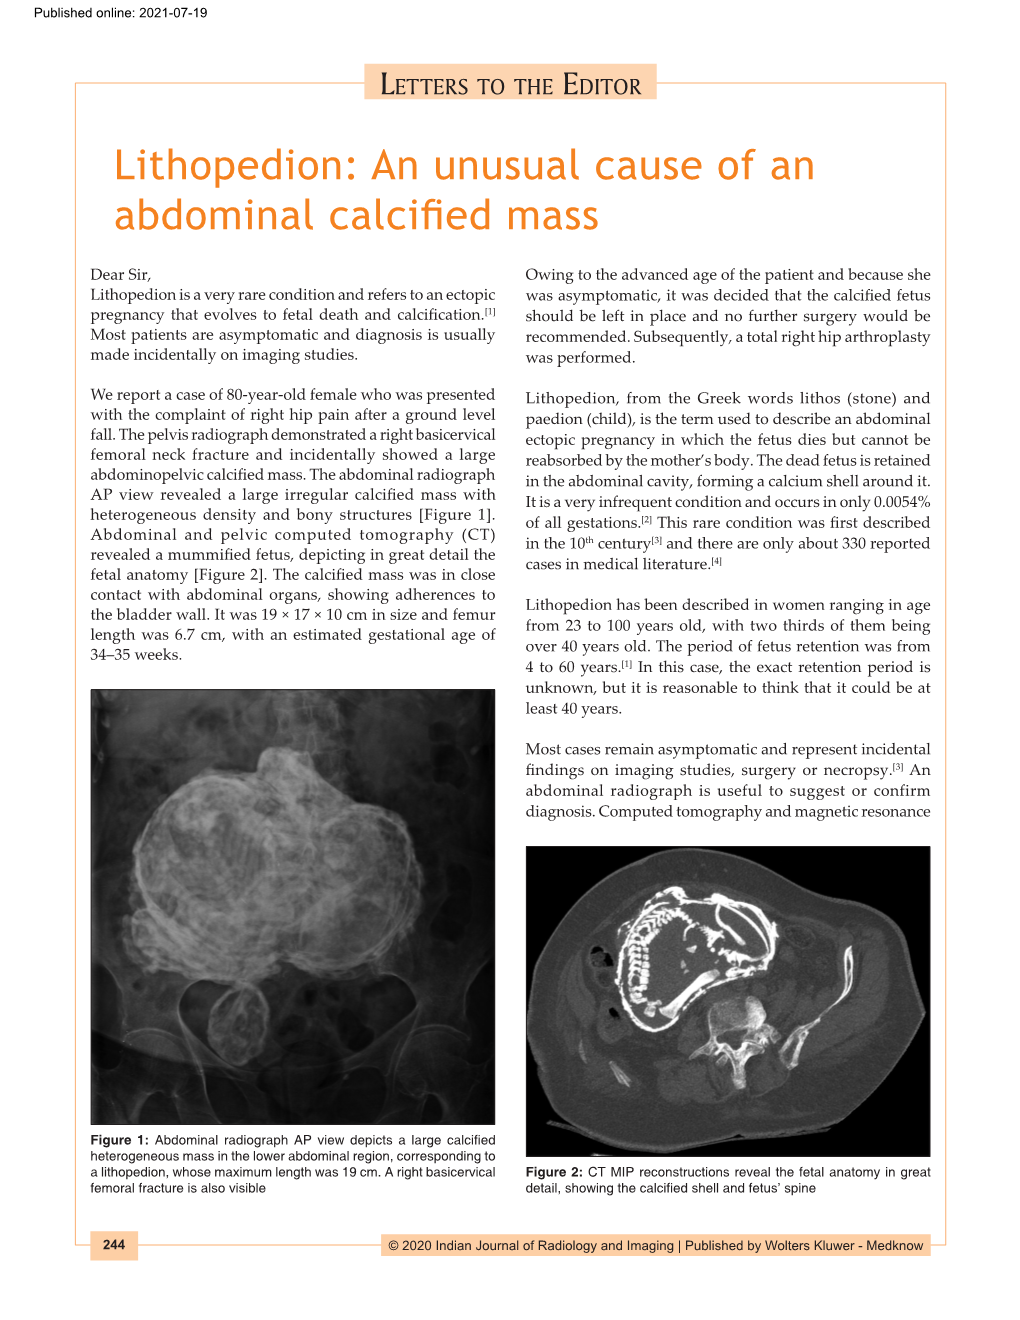 Lithopedion: an Unusual Cause of an Abdominal Calcified Mass